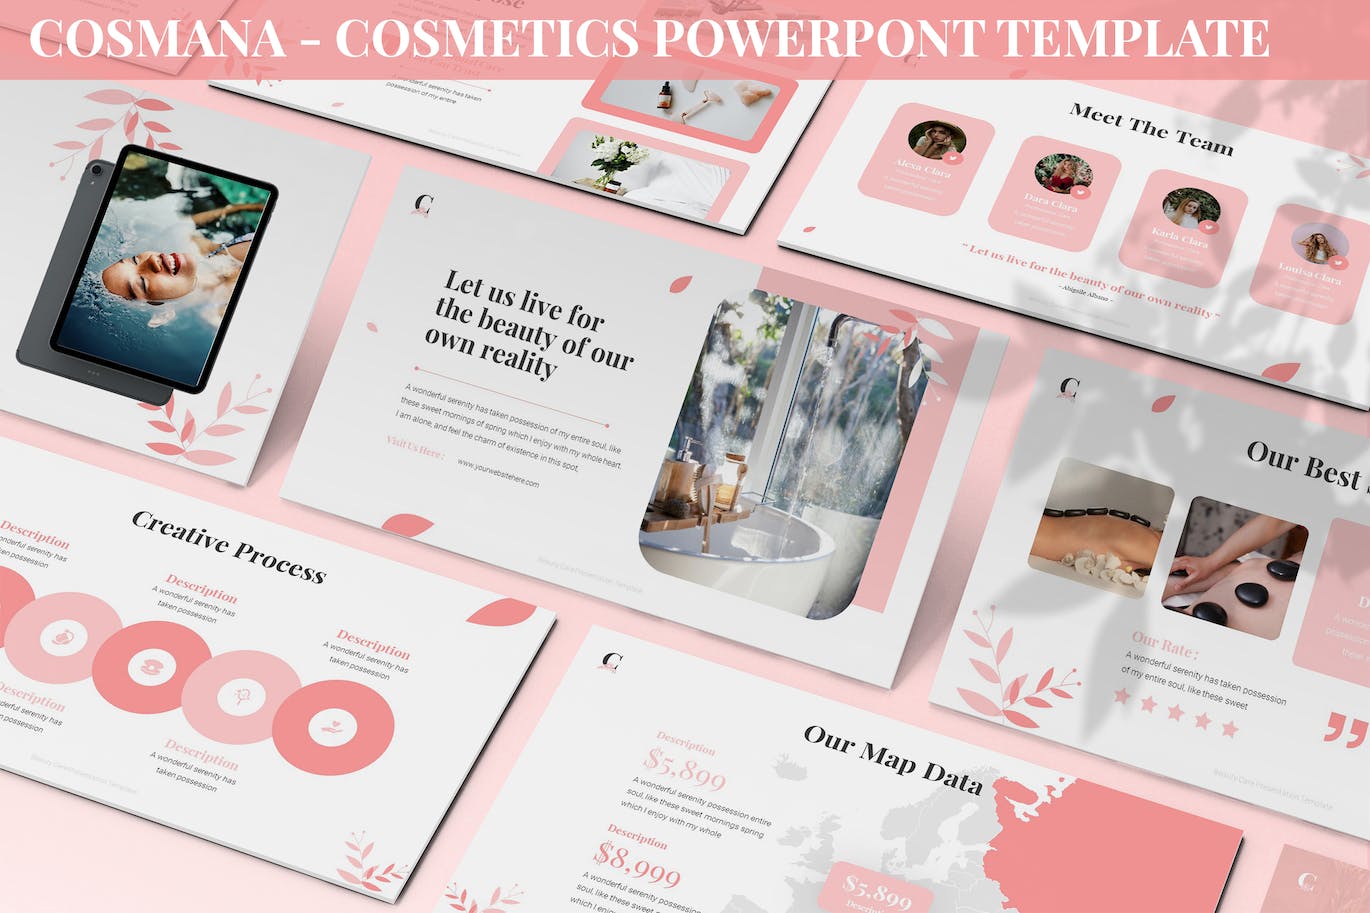 A selection of images of unique presentation template slides on the theme of cosmetics.